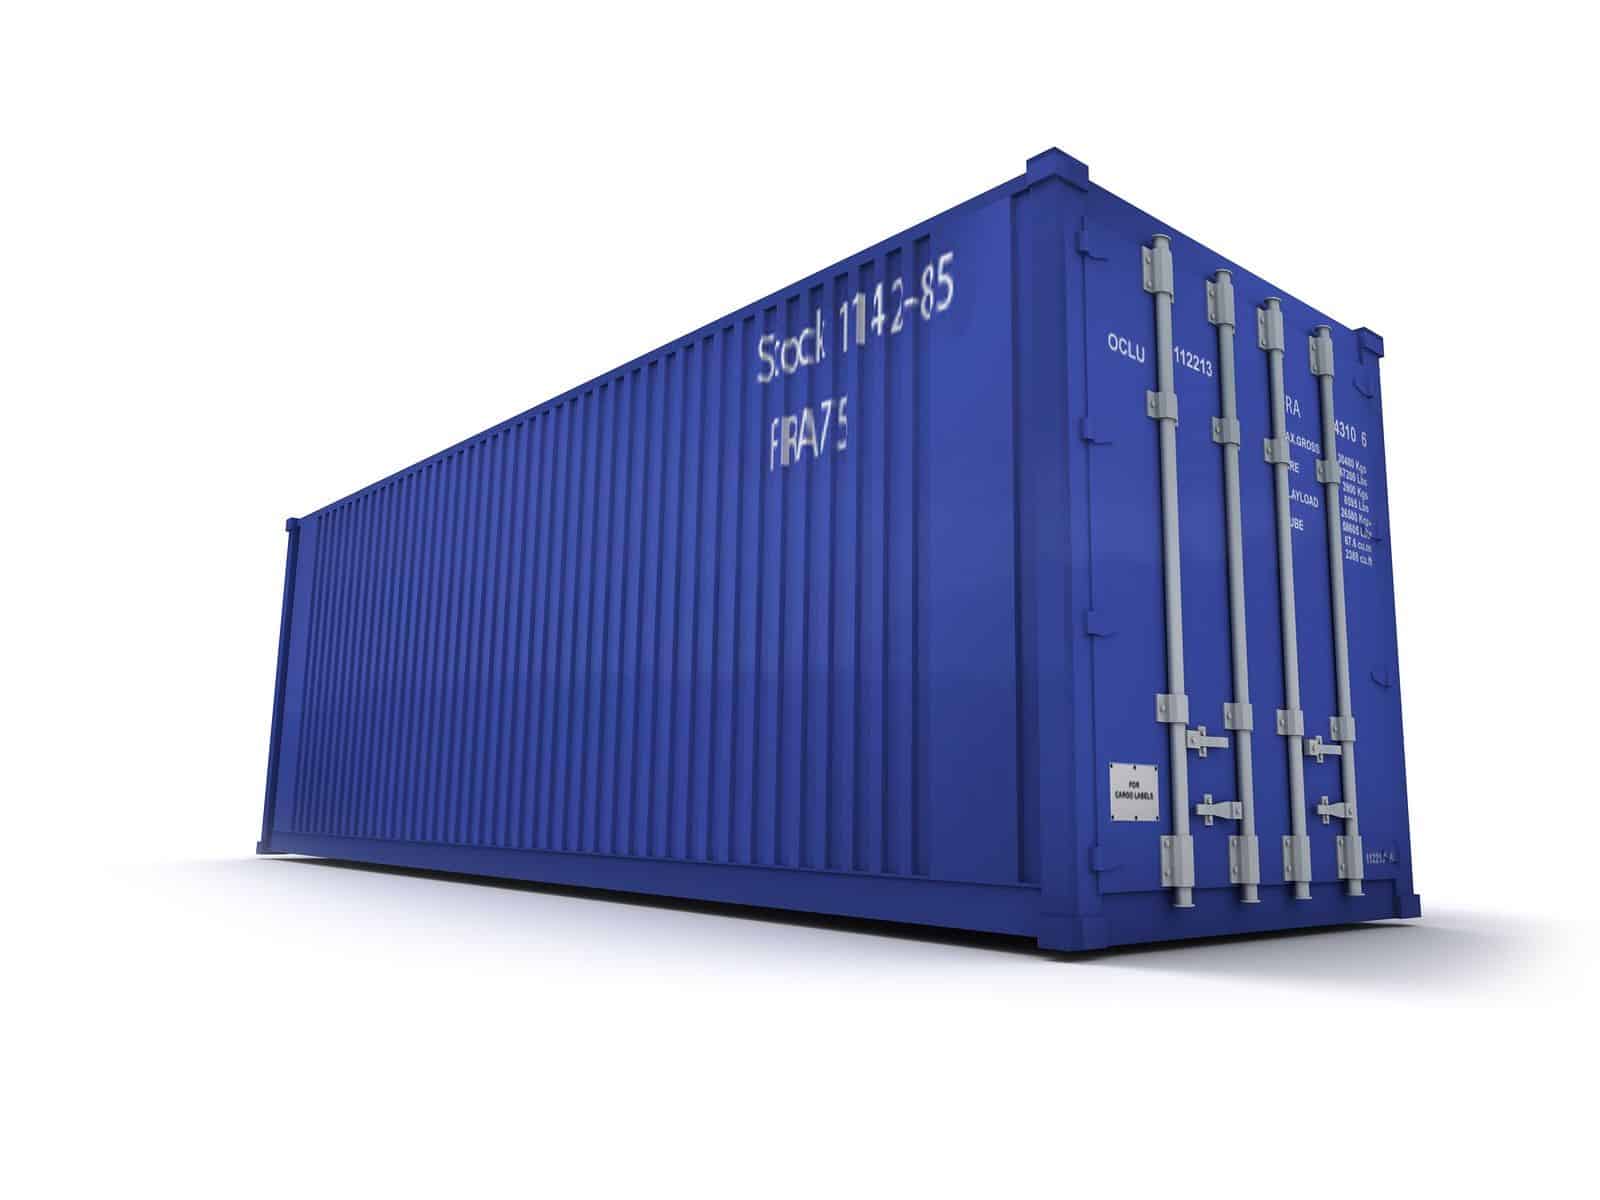 Doing Business with Shipping Containers? Here's What You Should Know